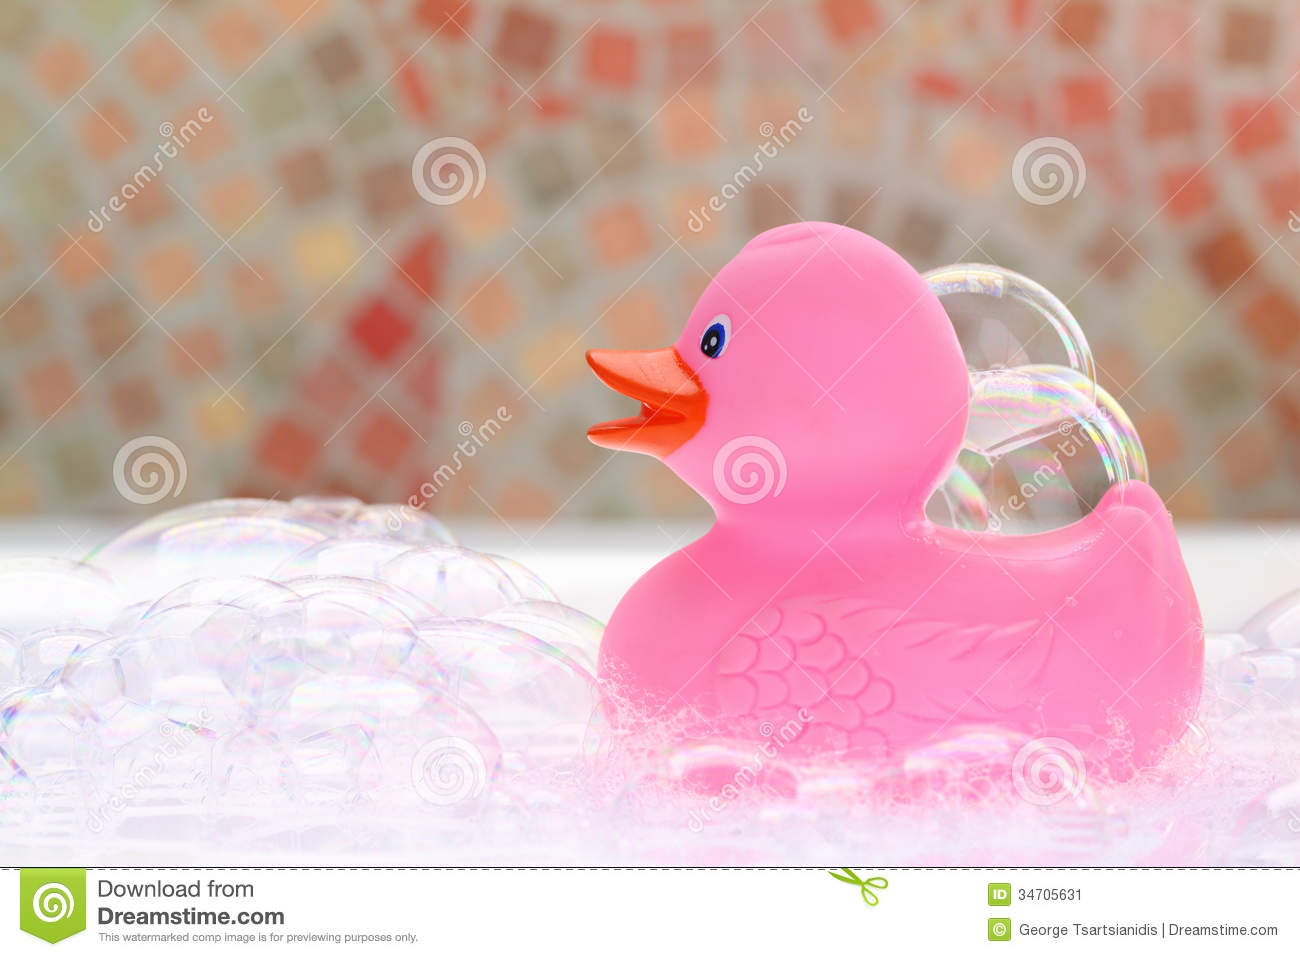 Pink Rubber Duck Stock Image   Image  34705631